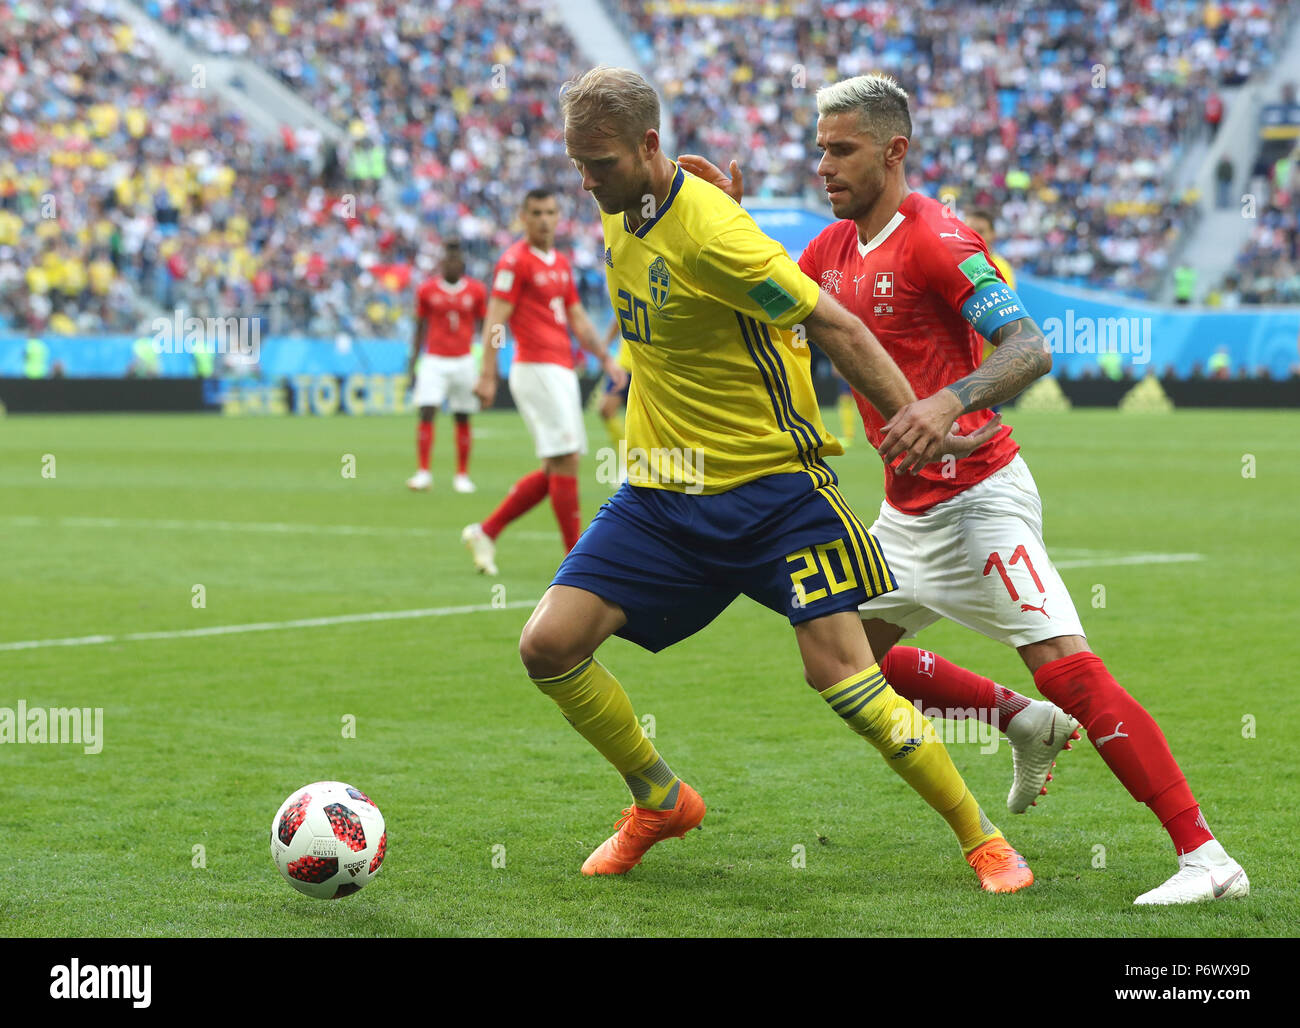 Saint Petersburg, Russia. 3rd July, 2018. Valon Behrami (R) of Switzerland vies with Ola Toivonen of Sweden during the 2018 FIFA World Cup round of 16 match between Switzerland and Sweden in Saint Petersburg, Russia, July 3, 2018. Sweden won 1-0 and advanced to the quarter-final. Credit: Cao Can/Xinhua/Alamy Live News Stock Photo